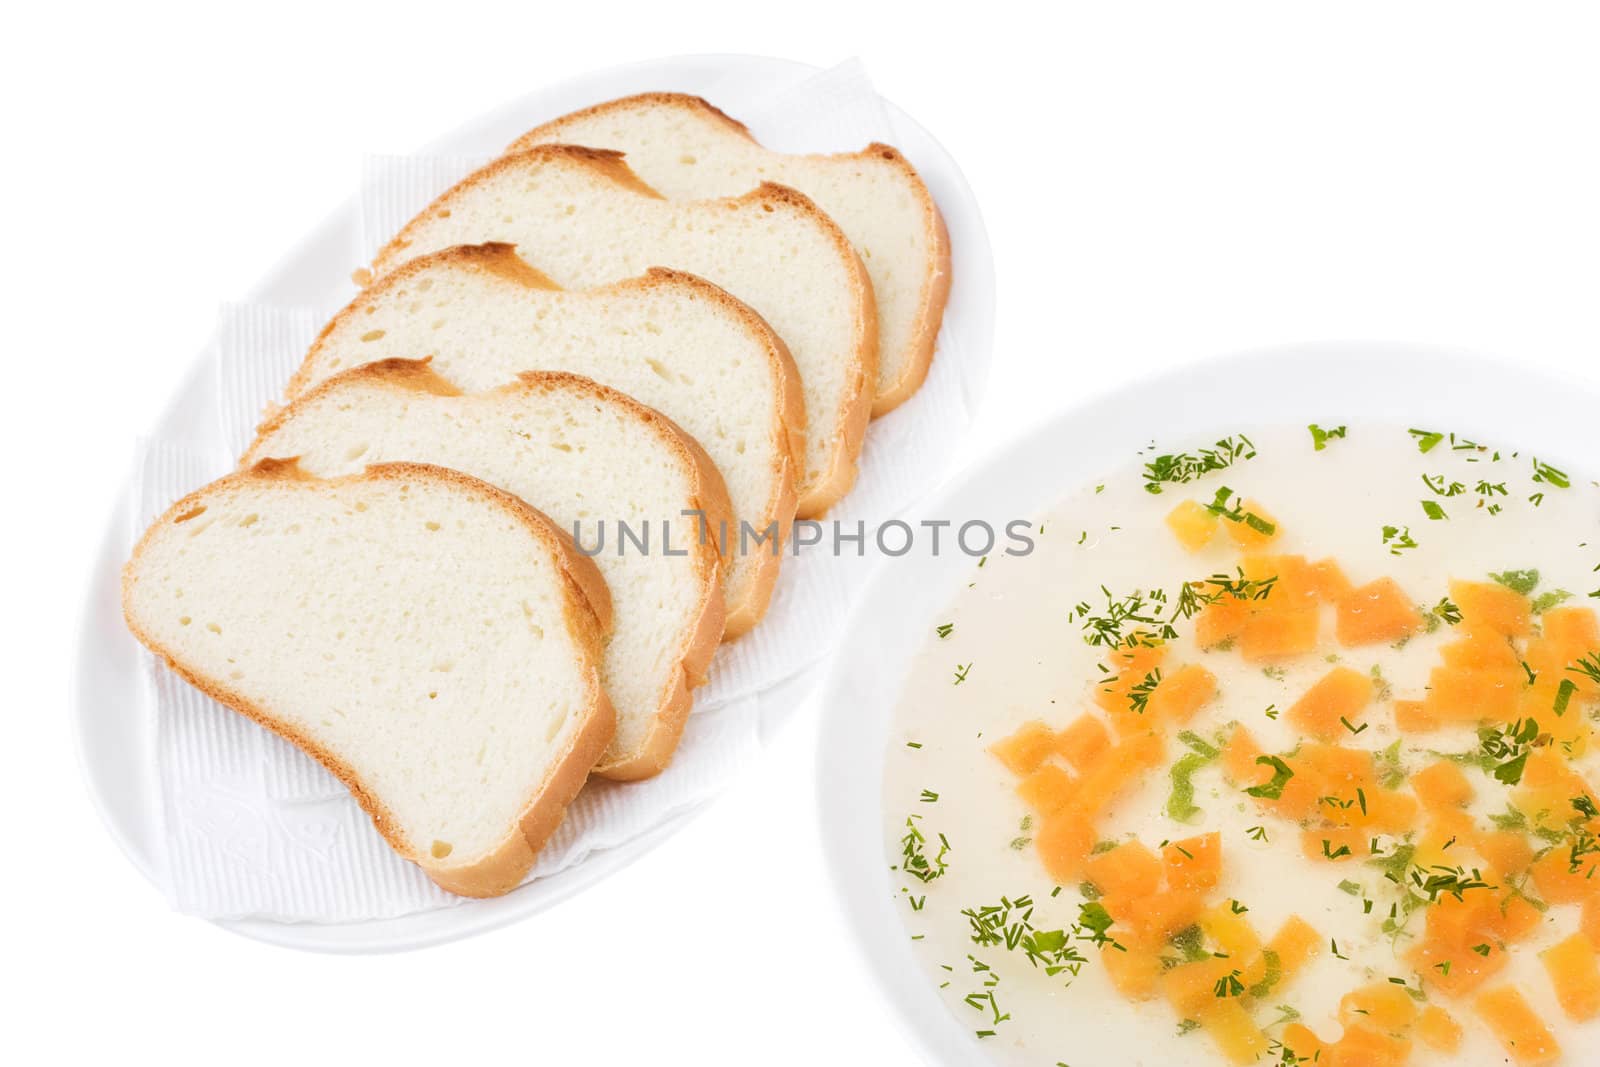 Clear Chicken Broth with Sliced Bread isolated over white. Bon appetit!